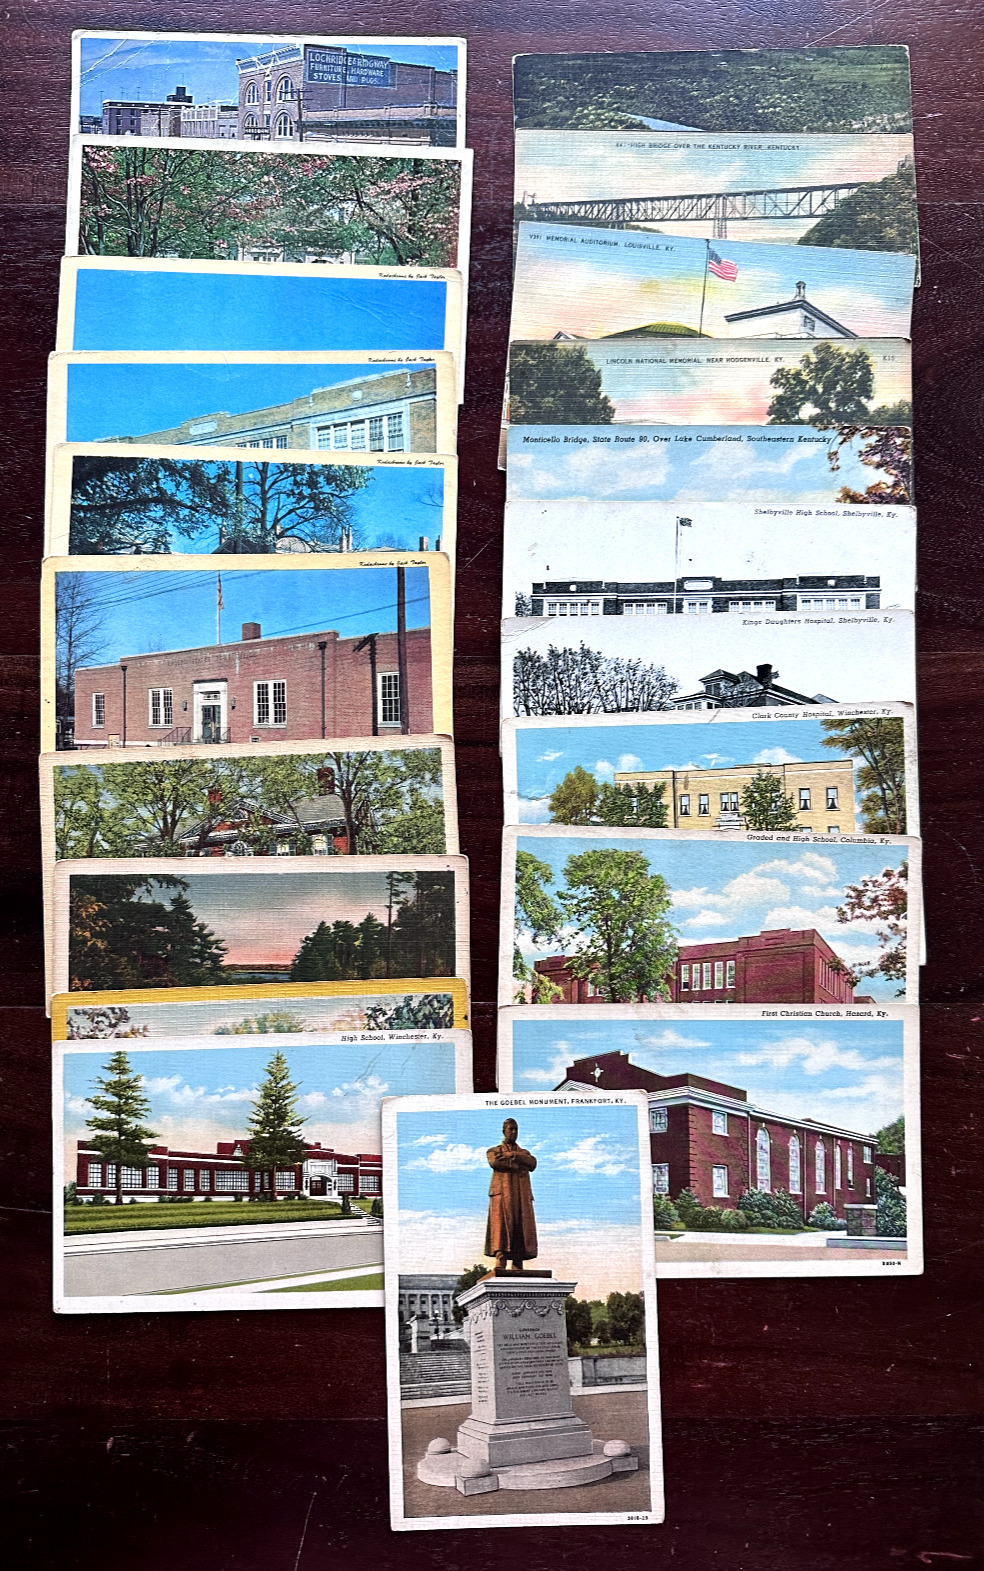 21 VINTAGE UNPOSTED POSTCARDS OF LANDMARKS, SCENIC VIEWS FROM KENTUCKY - A334